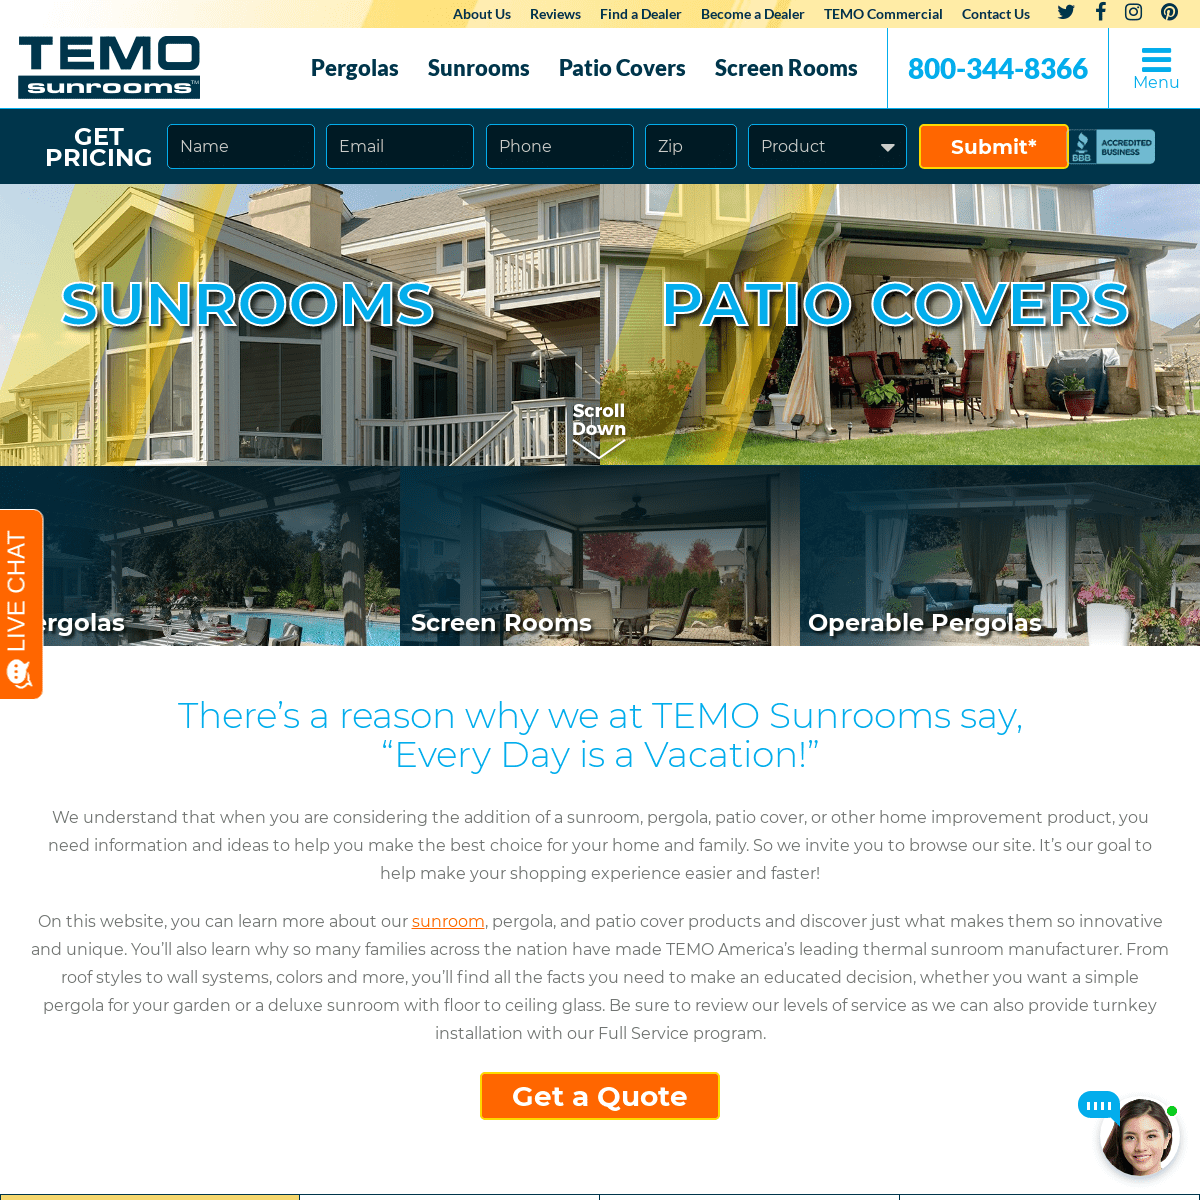 A complete backup of temosunrooms.com